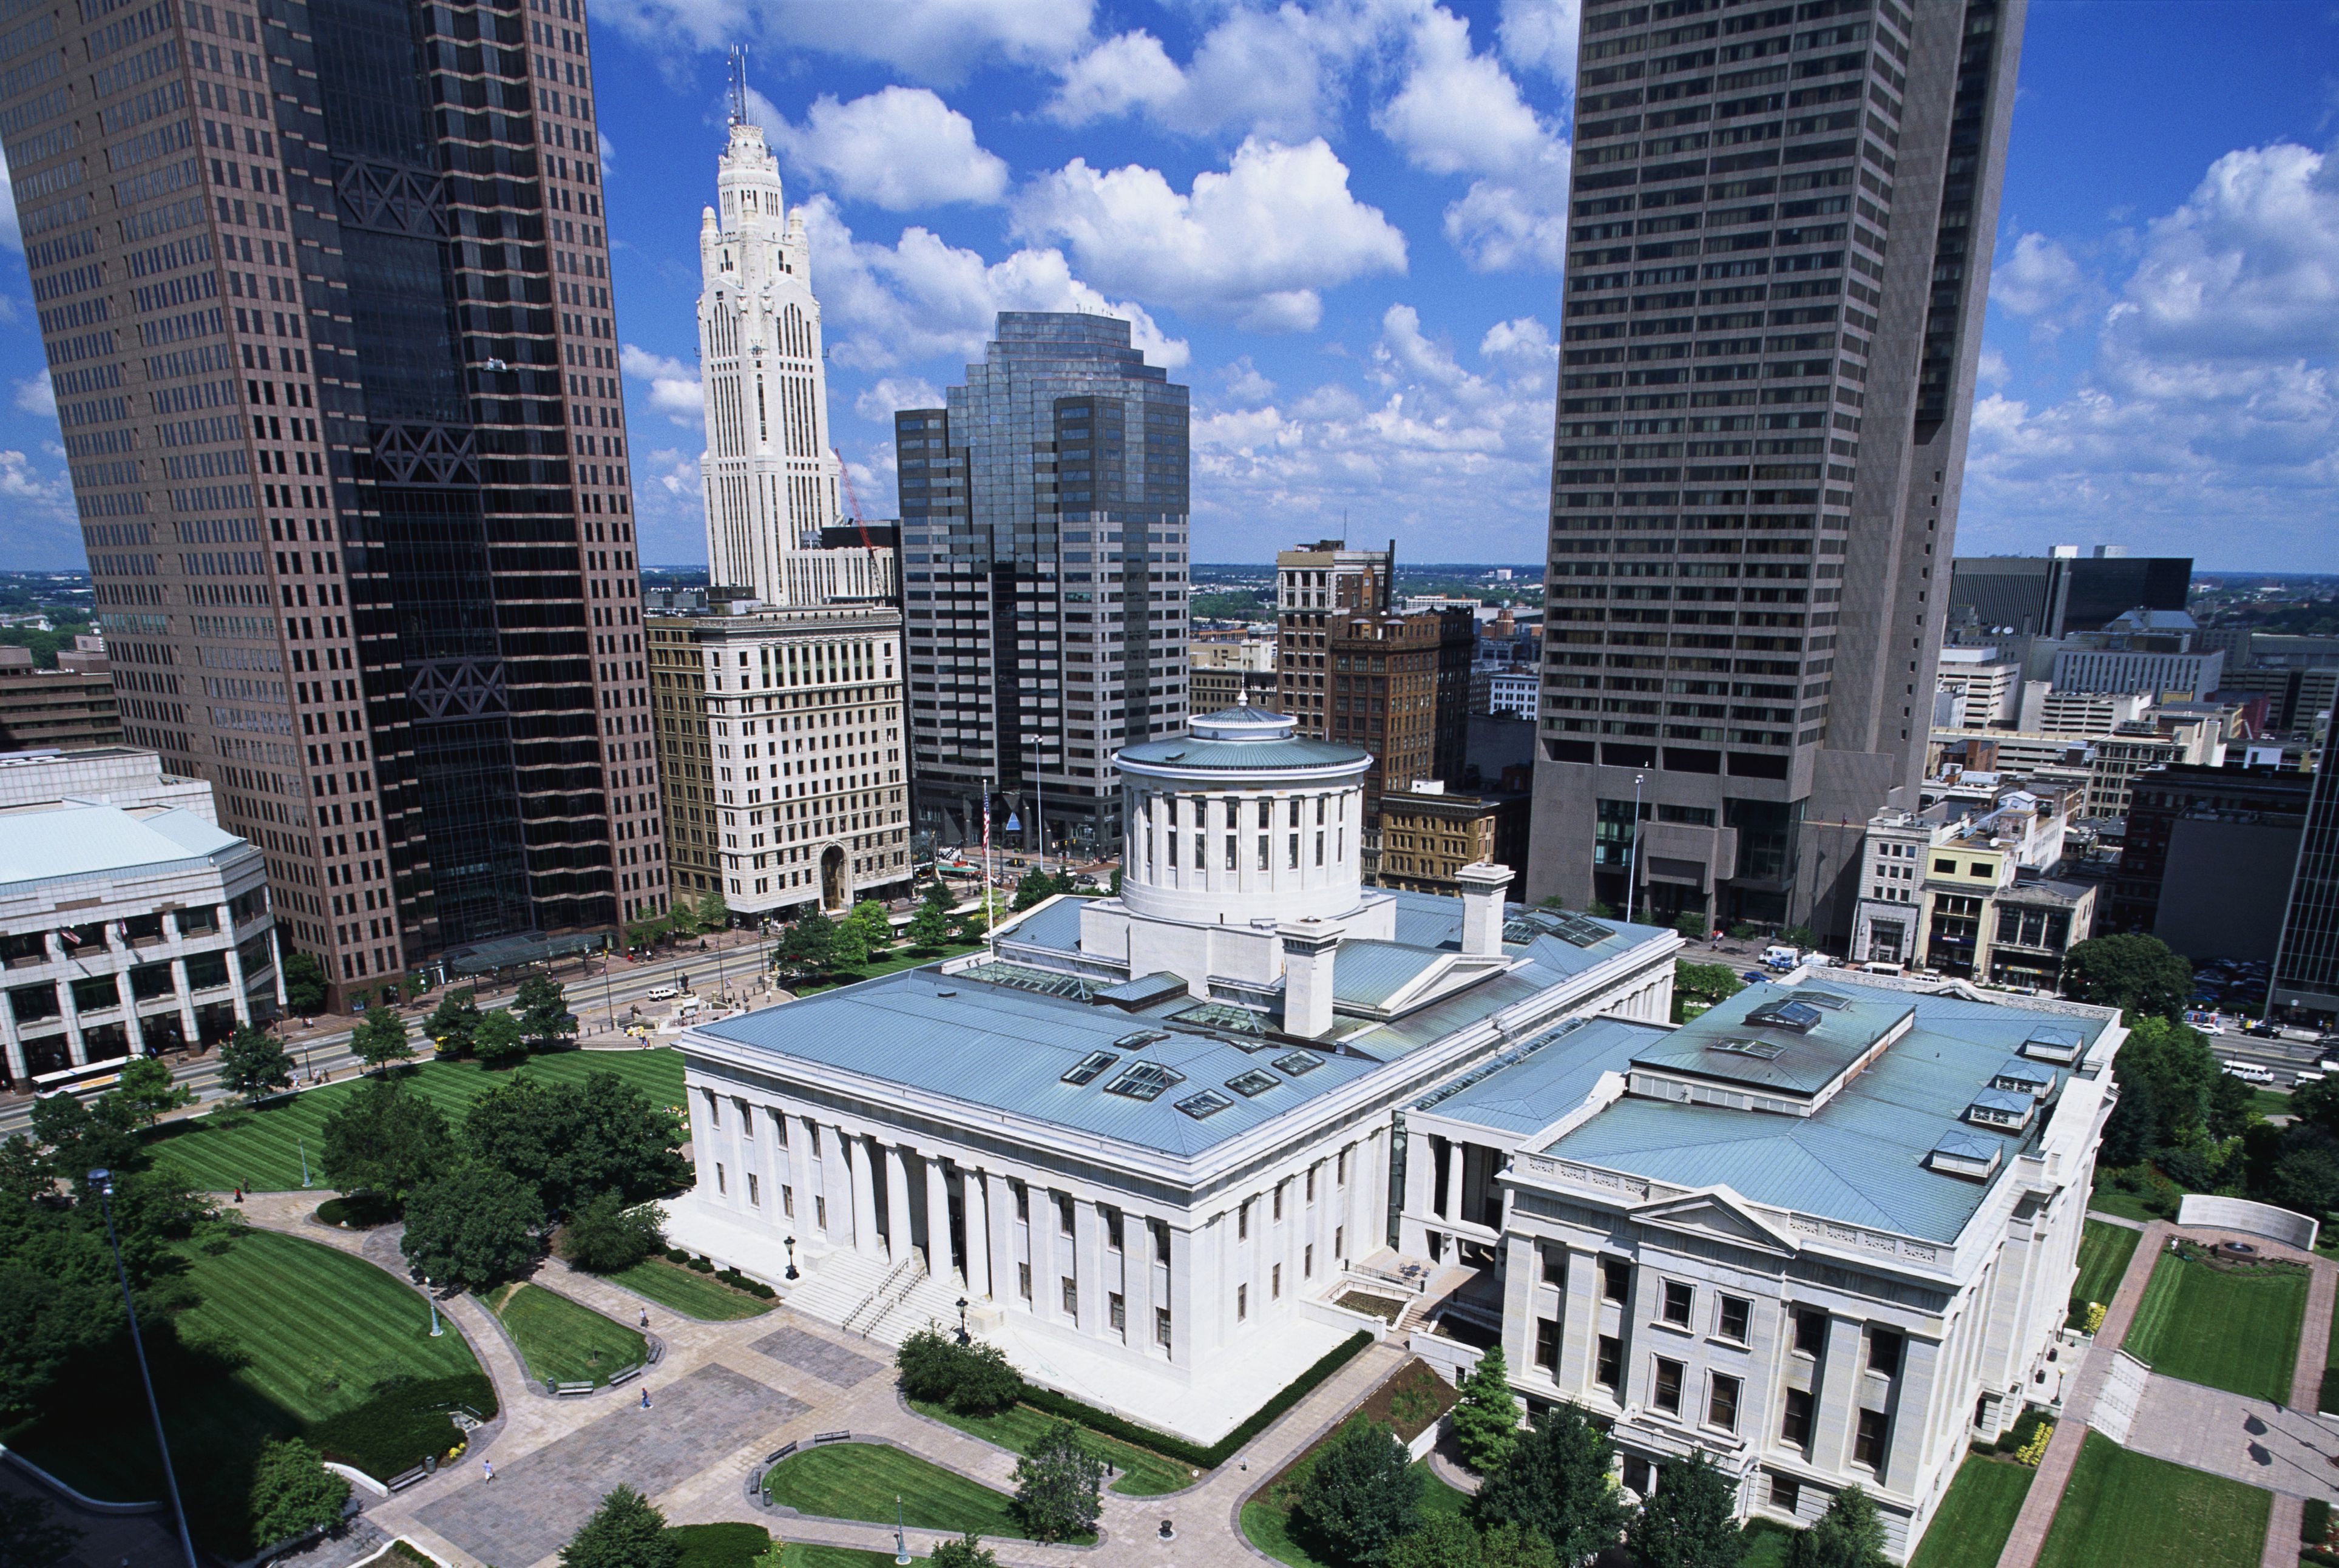 Free Attractions and Activities in Columbus, OH